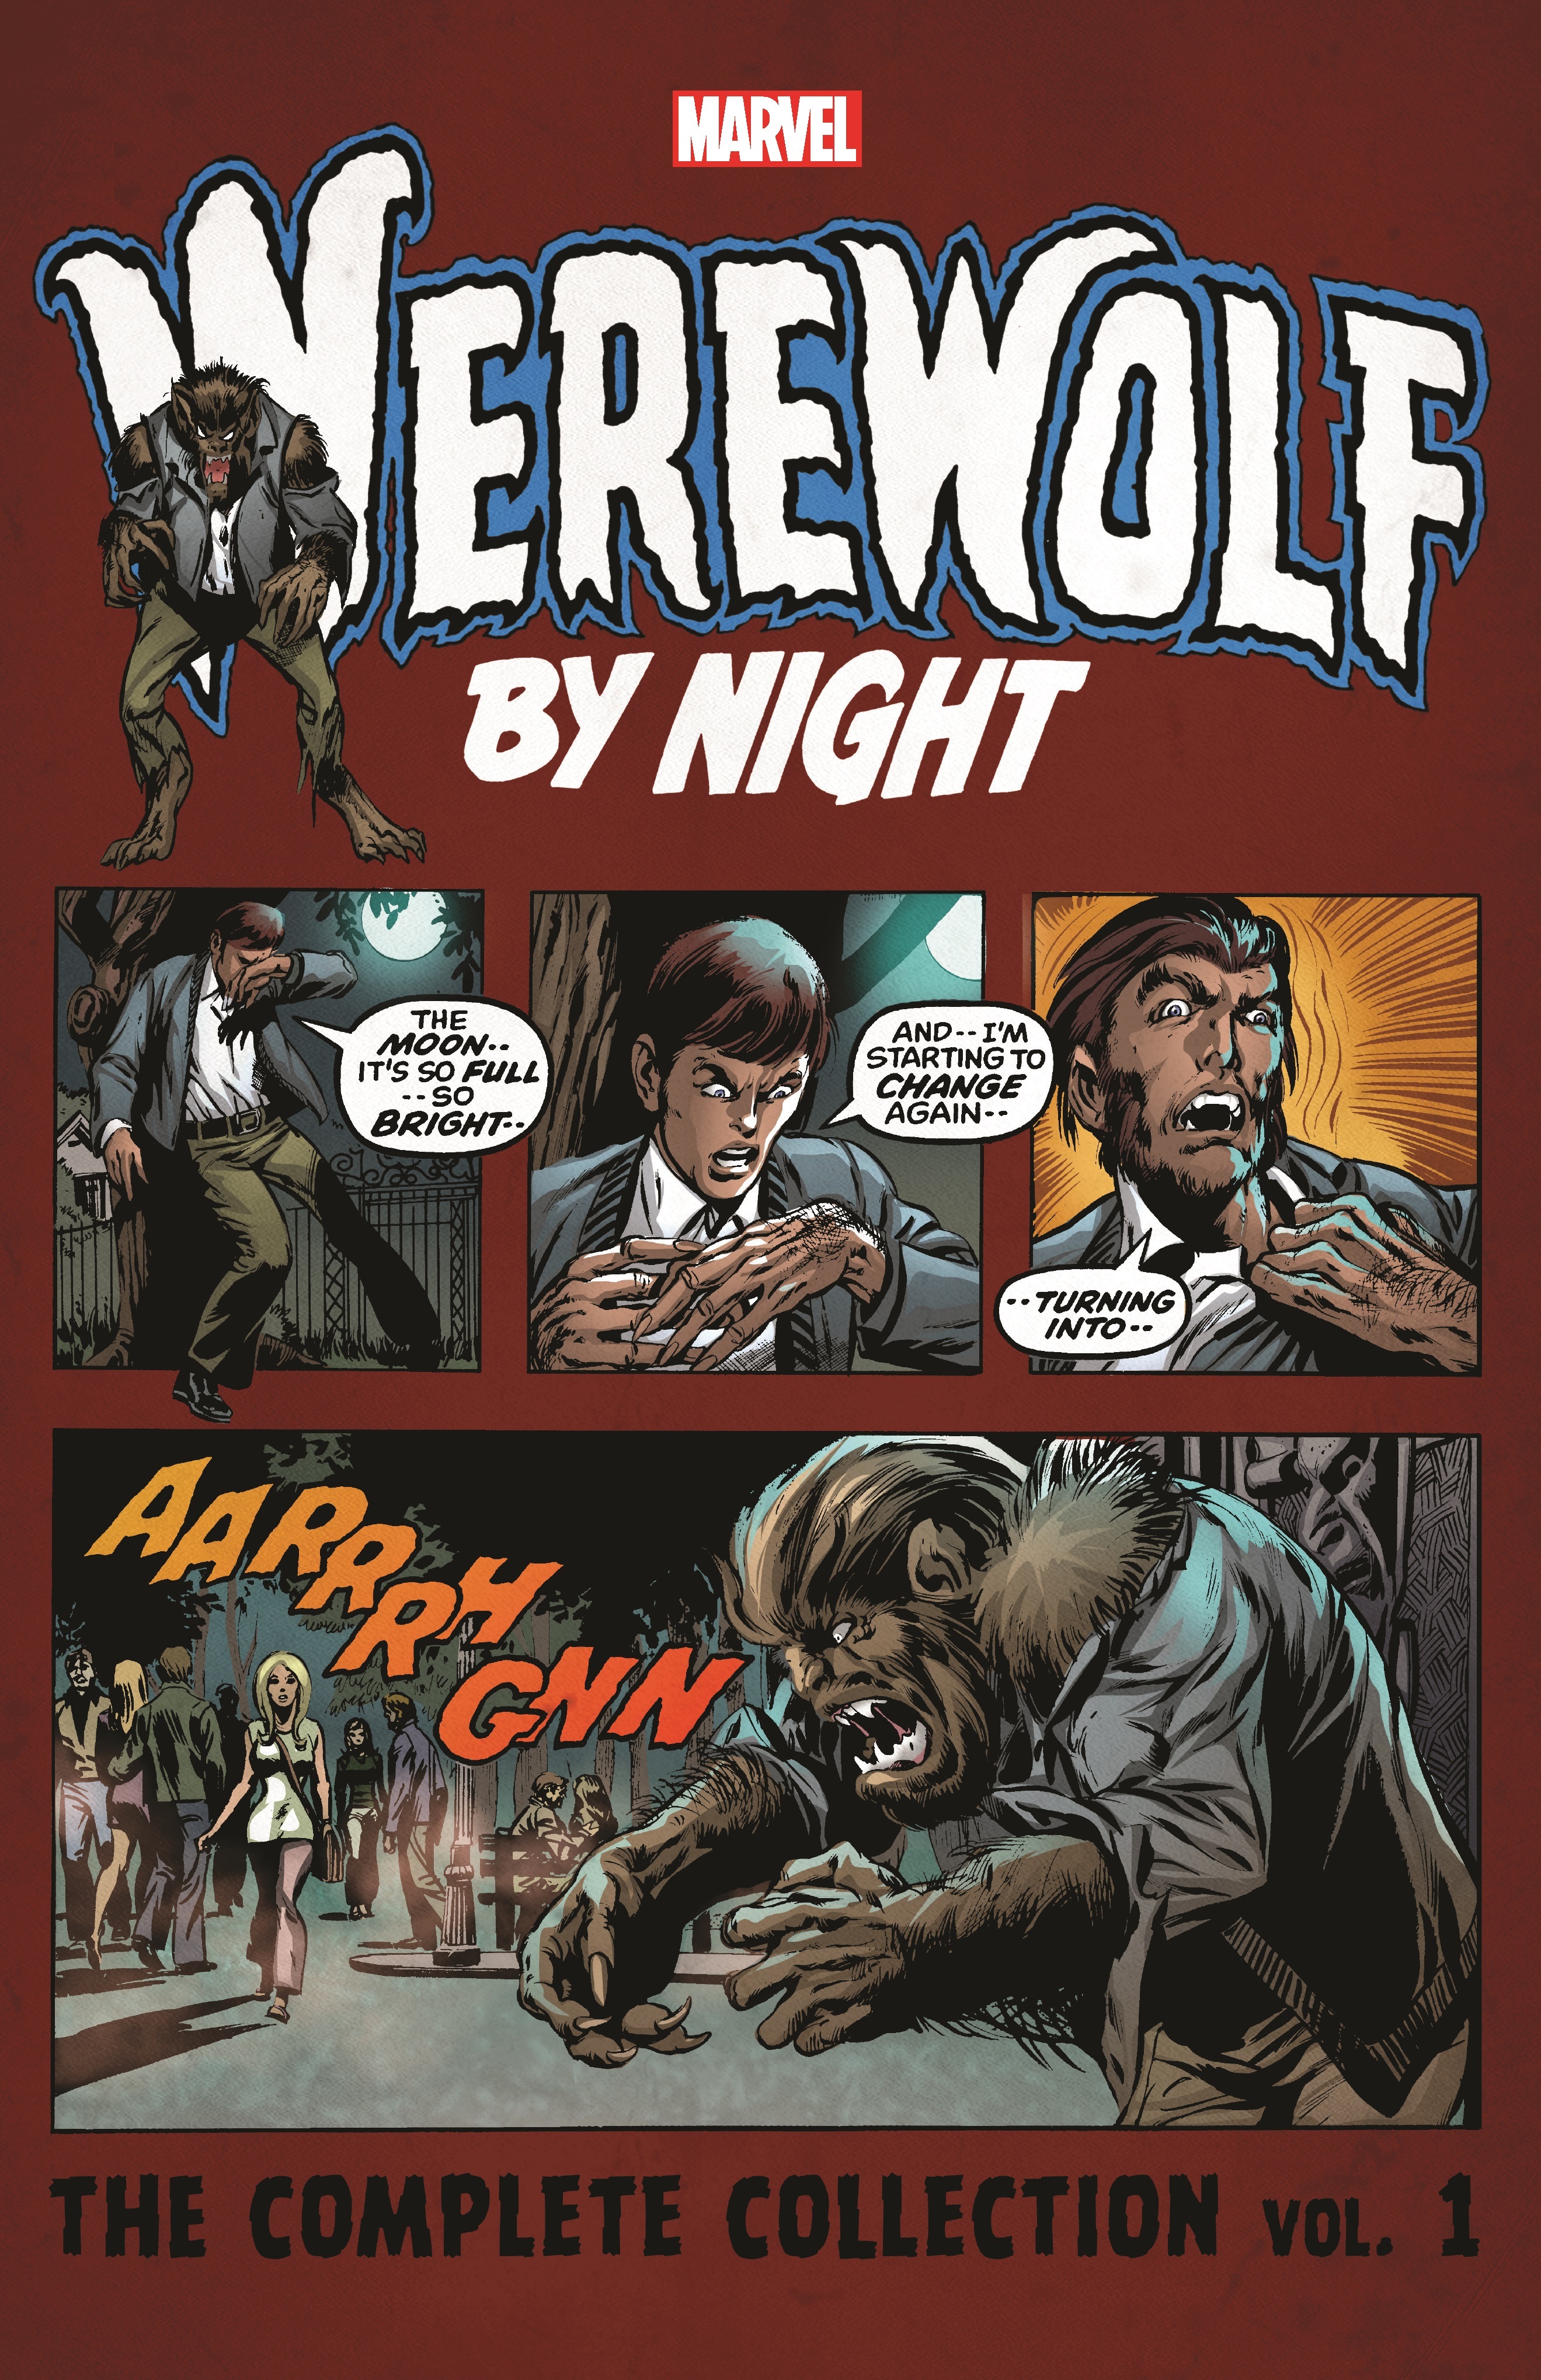 Werewolf by Night: The Complete Collection Vol. 1 (Trade Paperback)